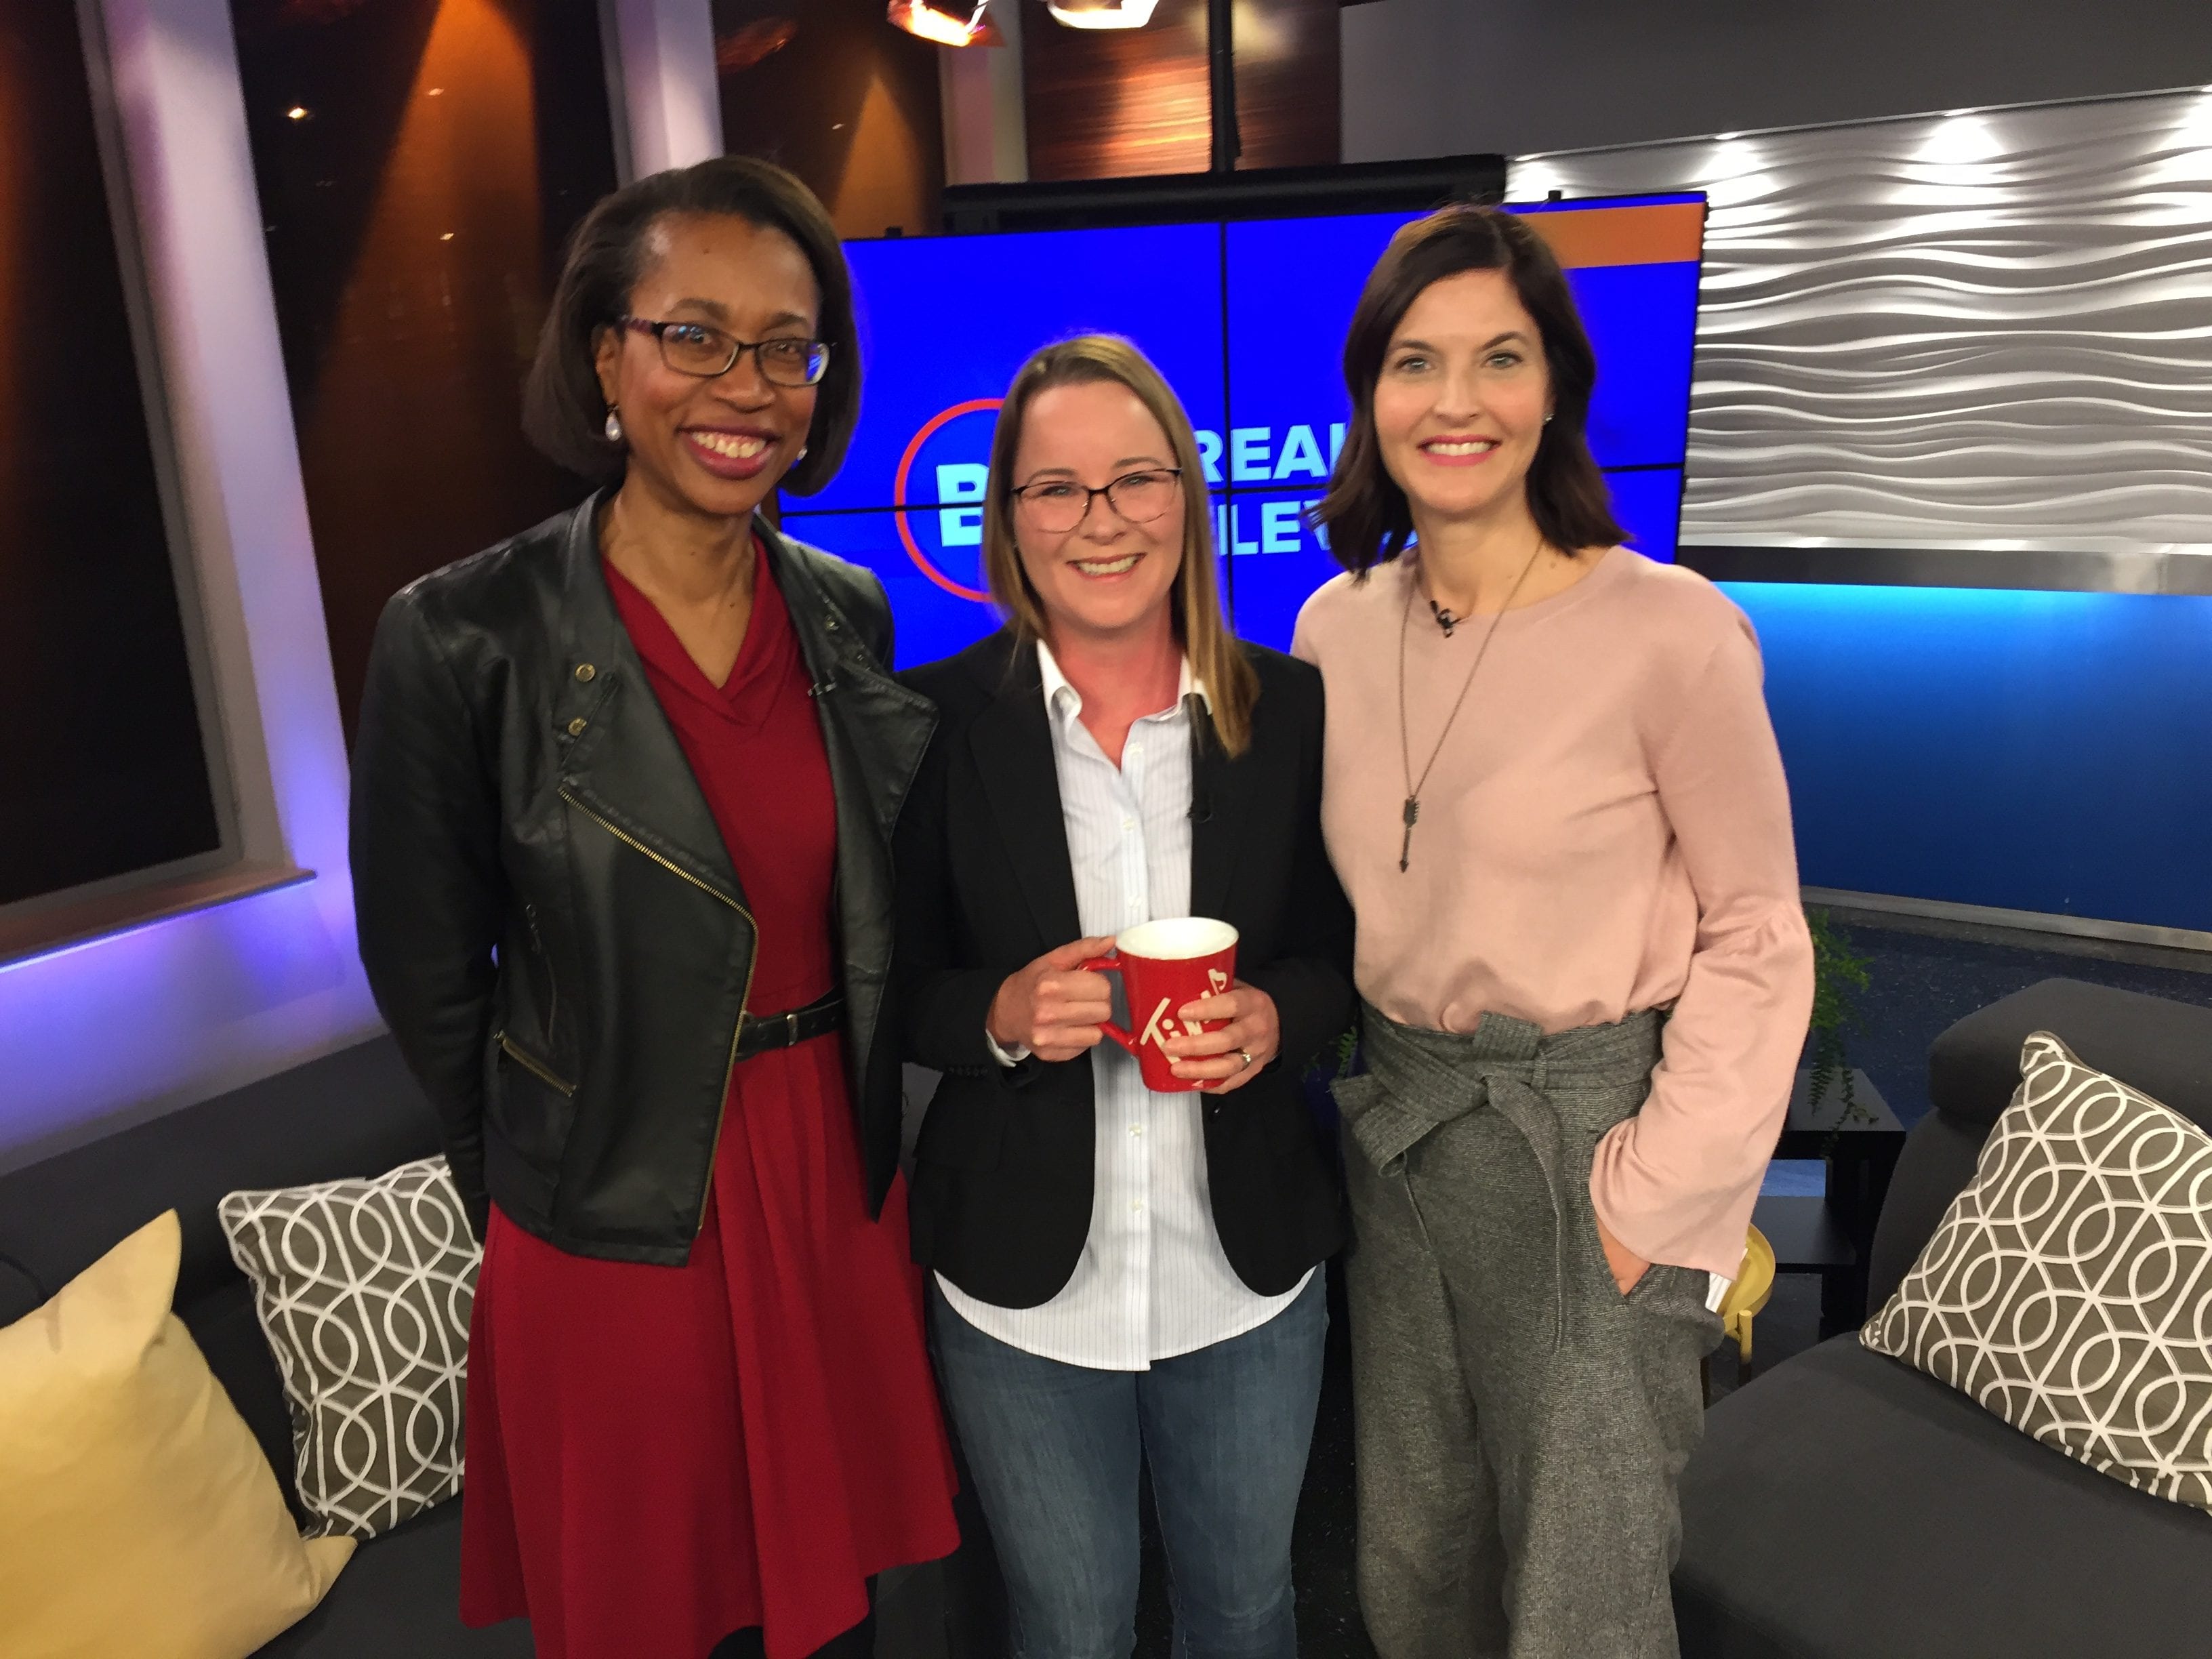 alison lapczuk and heather tomlinson on breakfast television with Leah Sarich